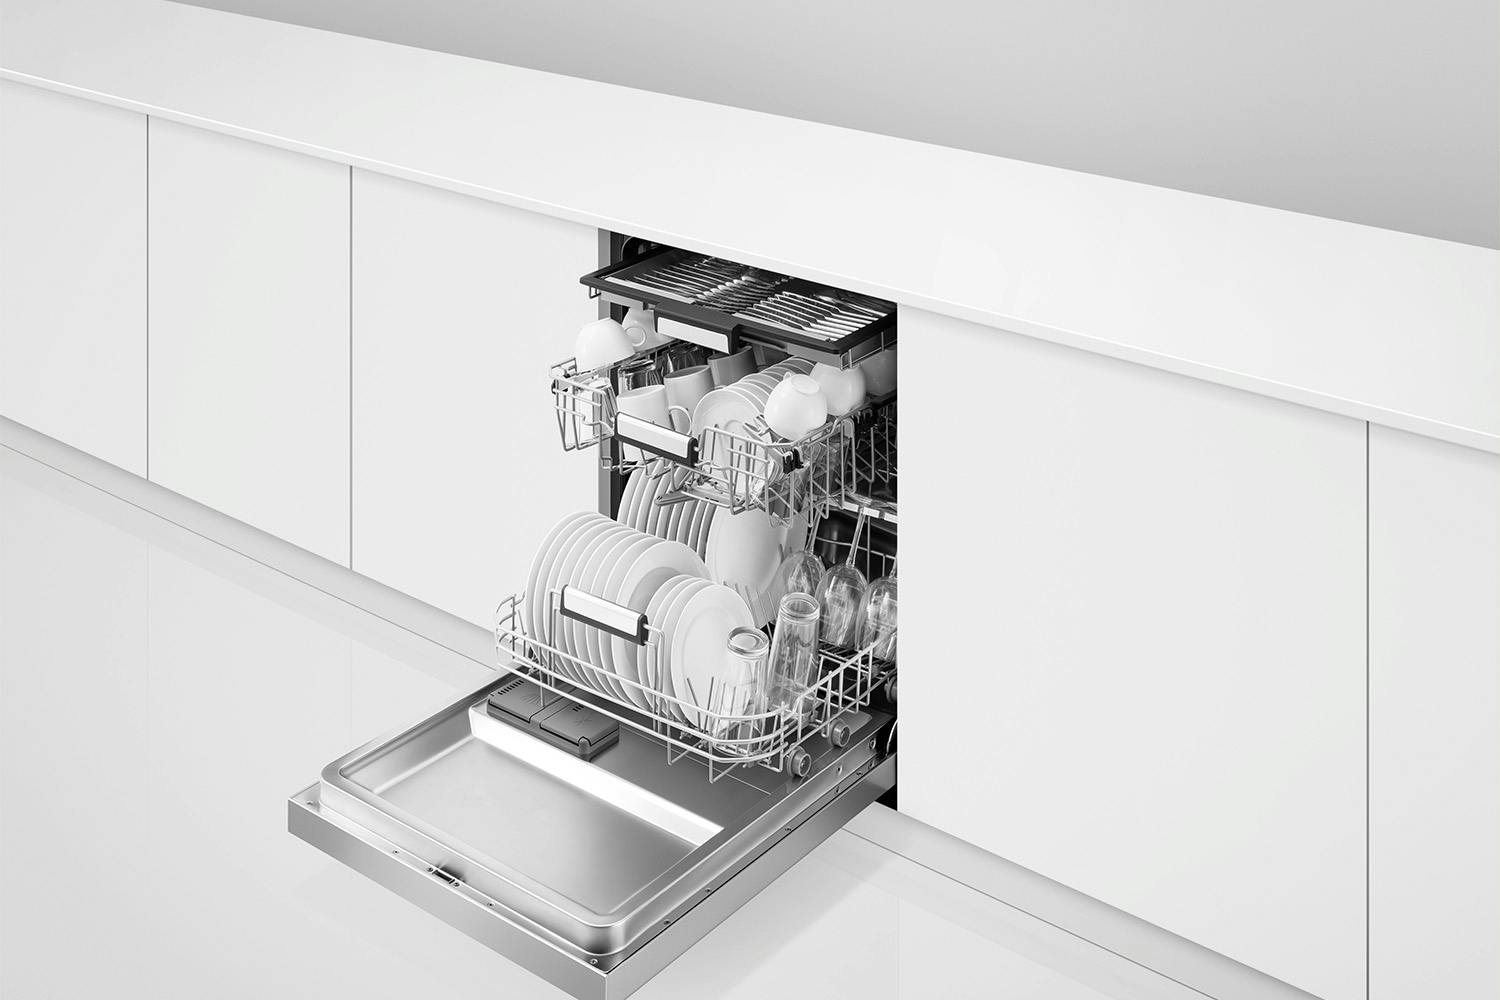 Fisher & Paykel 15 Place Setting Built Under Dishwasher